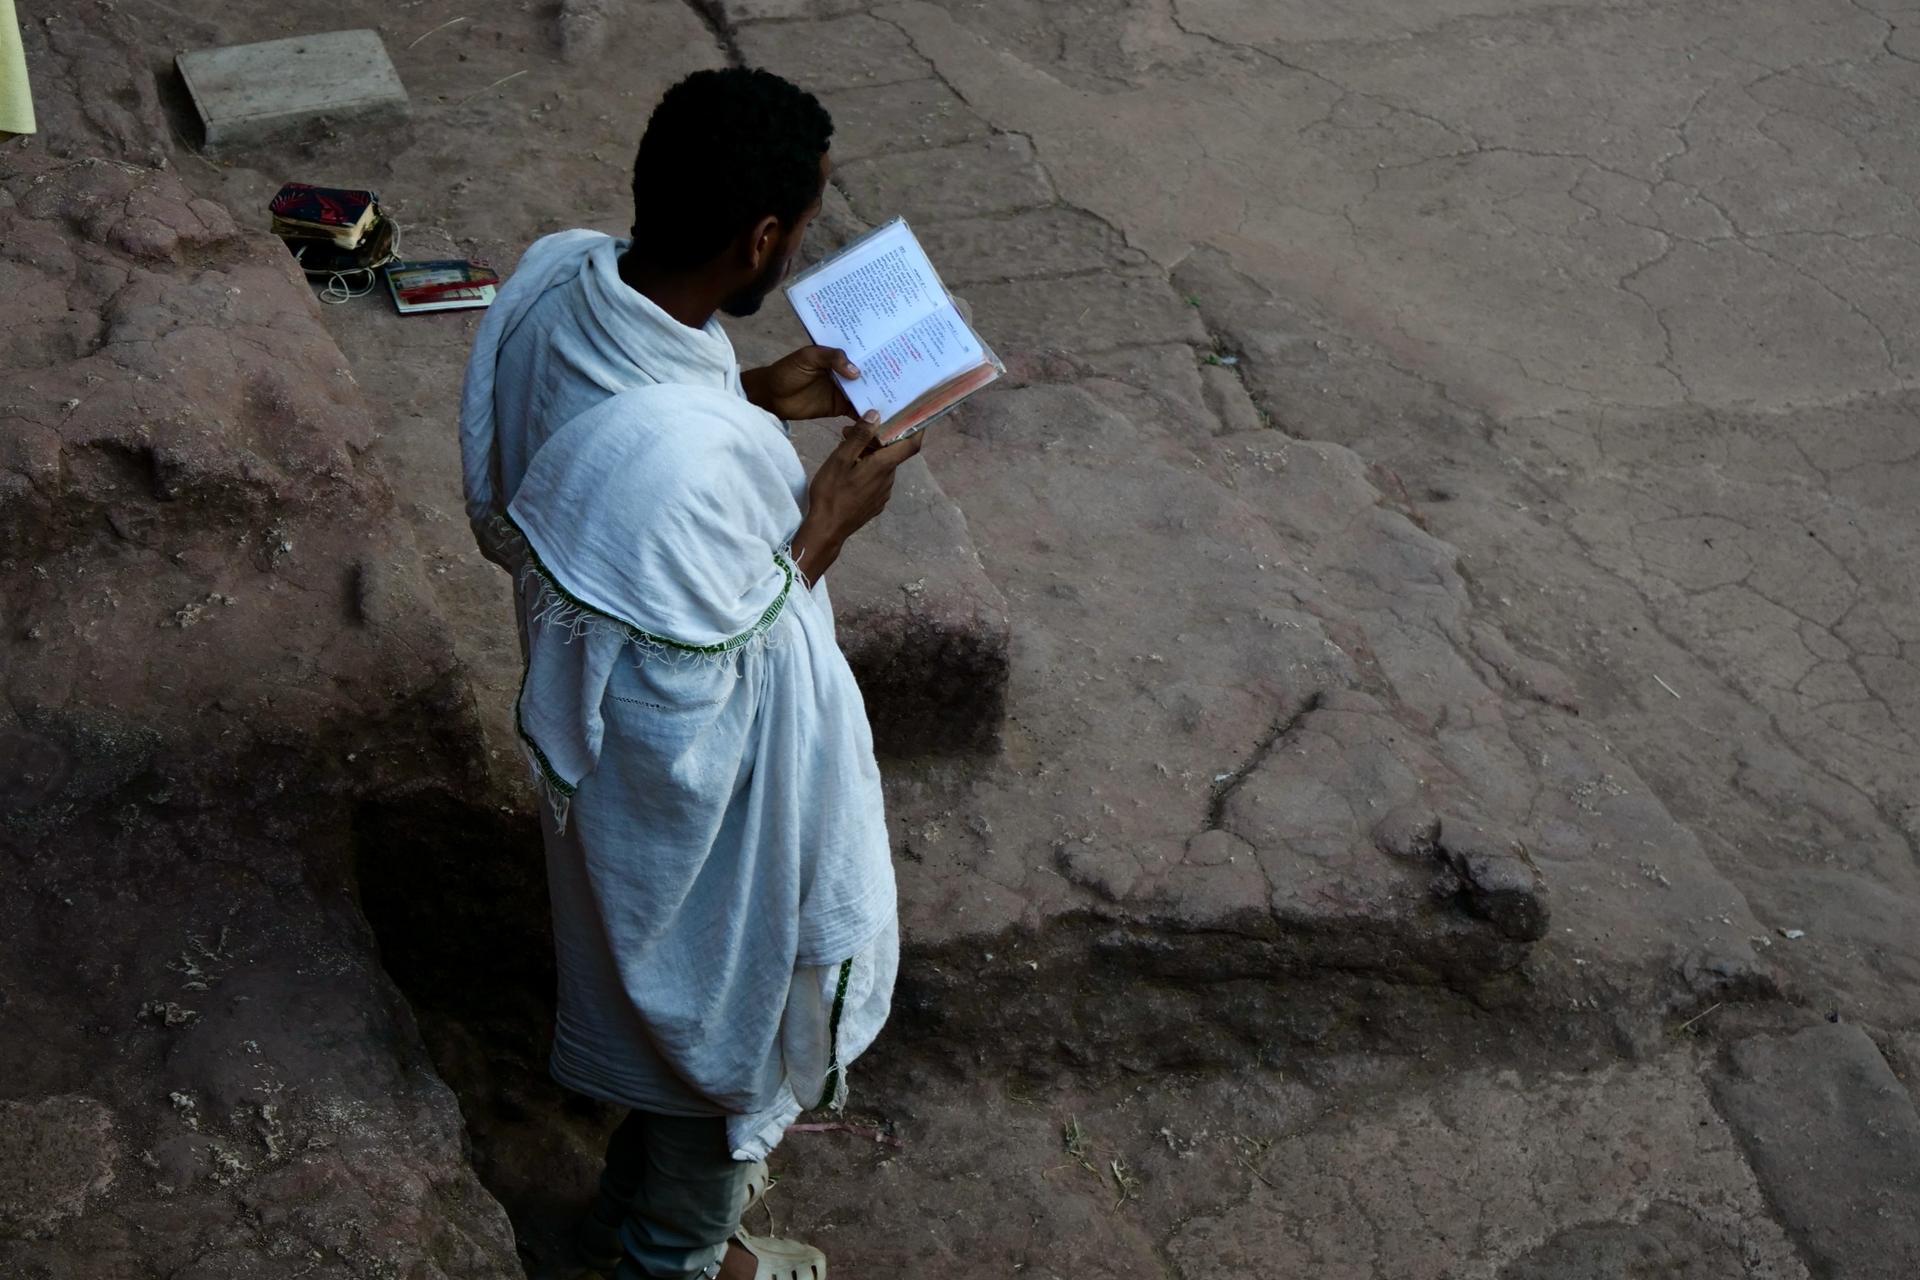 Young man prays at the Lalibela rock churches in Ethiopia, Feb. 16, 2022.